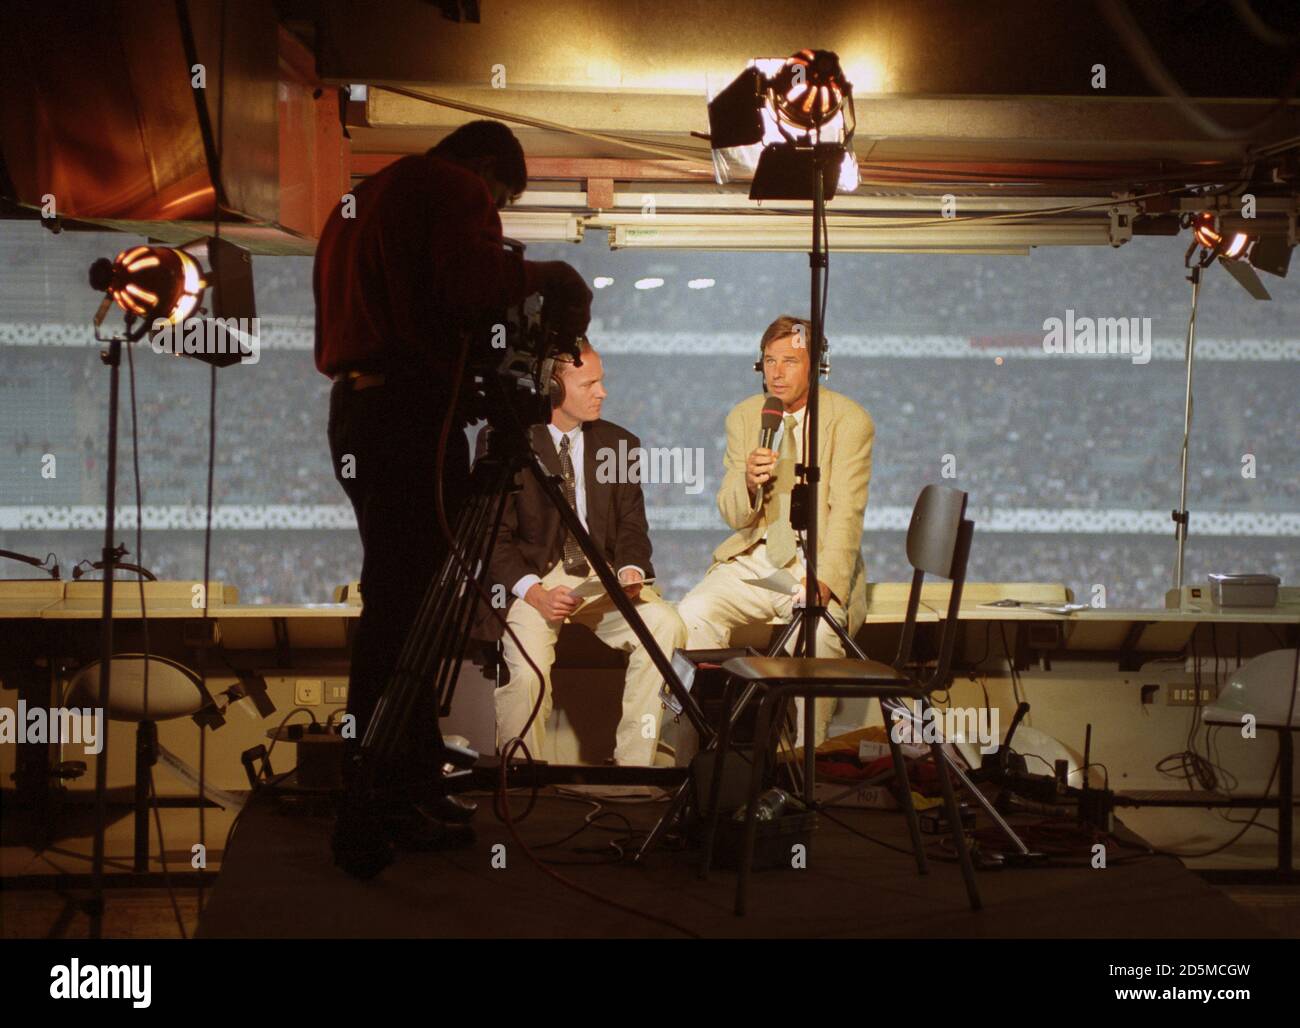 The TV studio covering the match Stock Photo